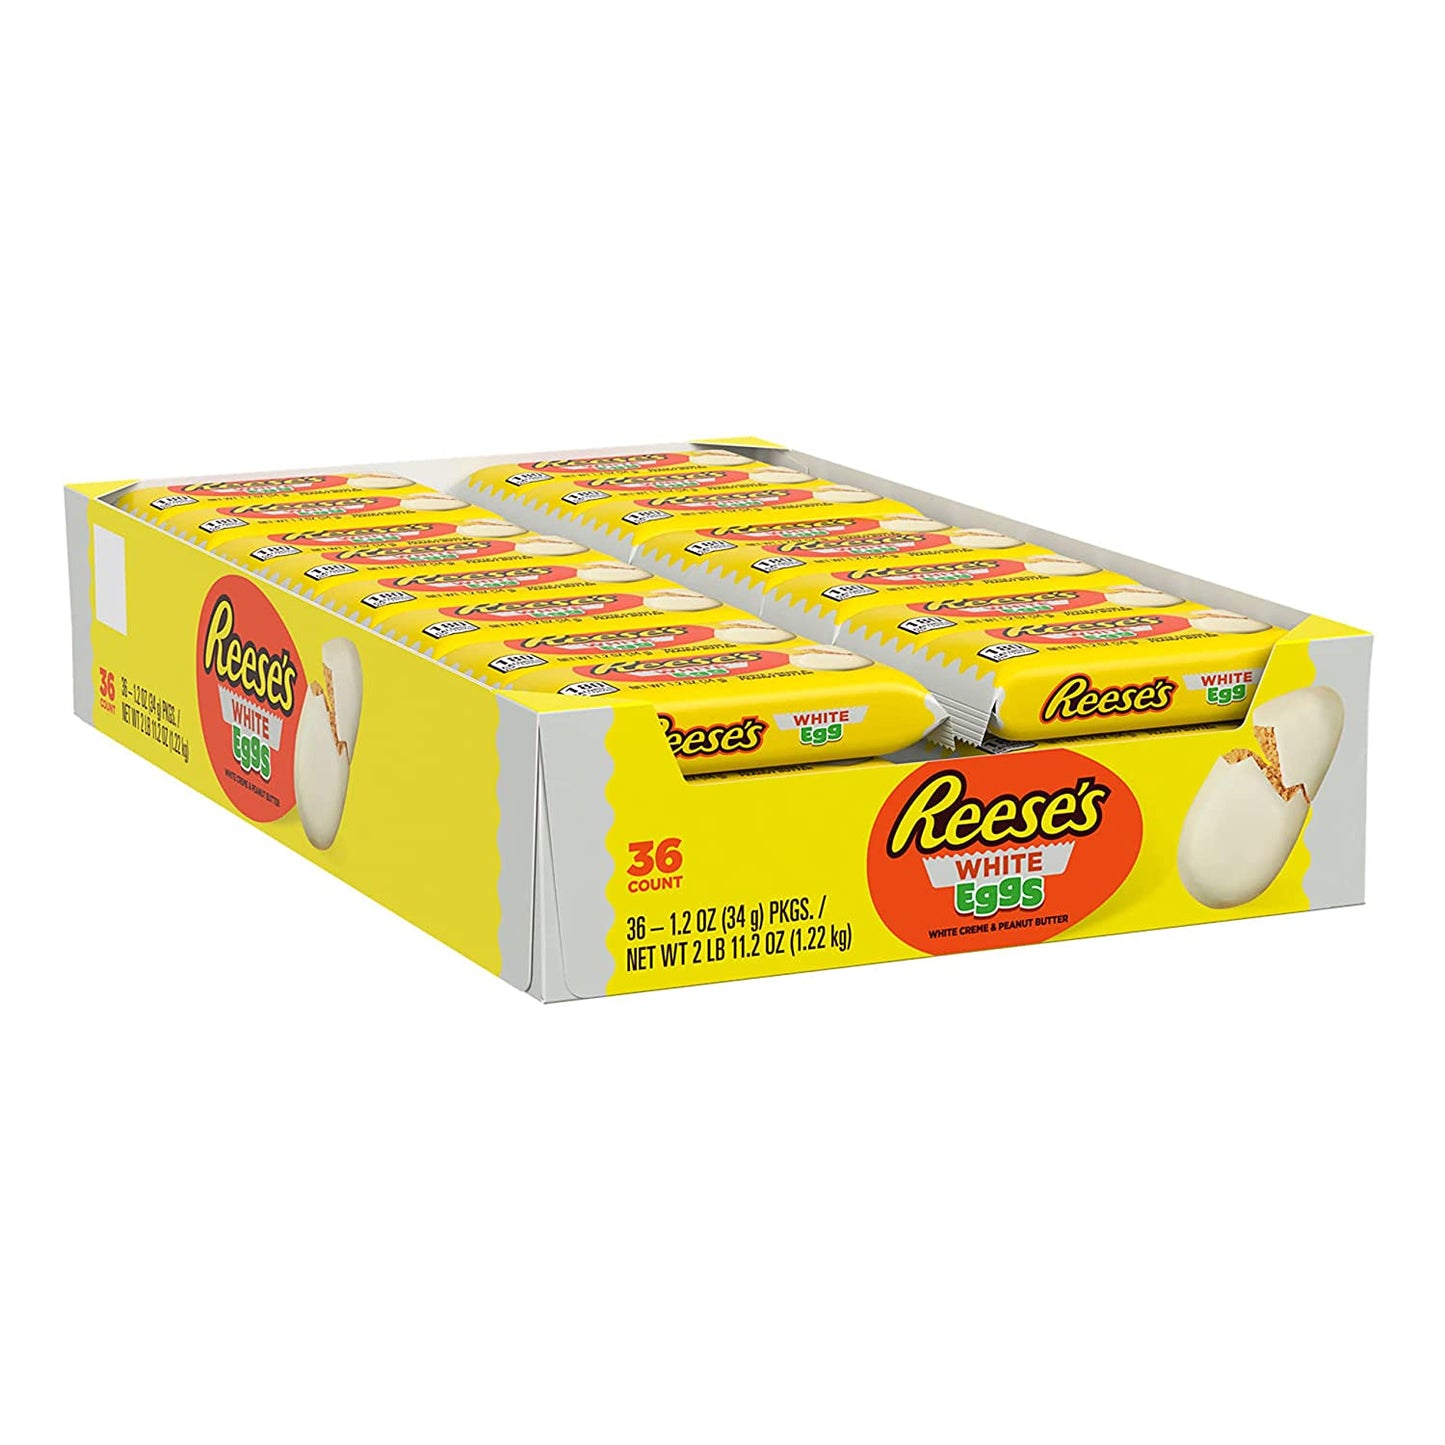 REESE'S White Creme and Peanut Butter Eggs Candy, Bulk, Easter, 1.2 oz Packs (36 Count)